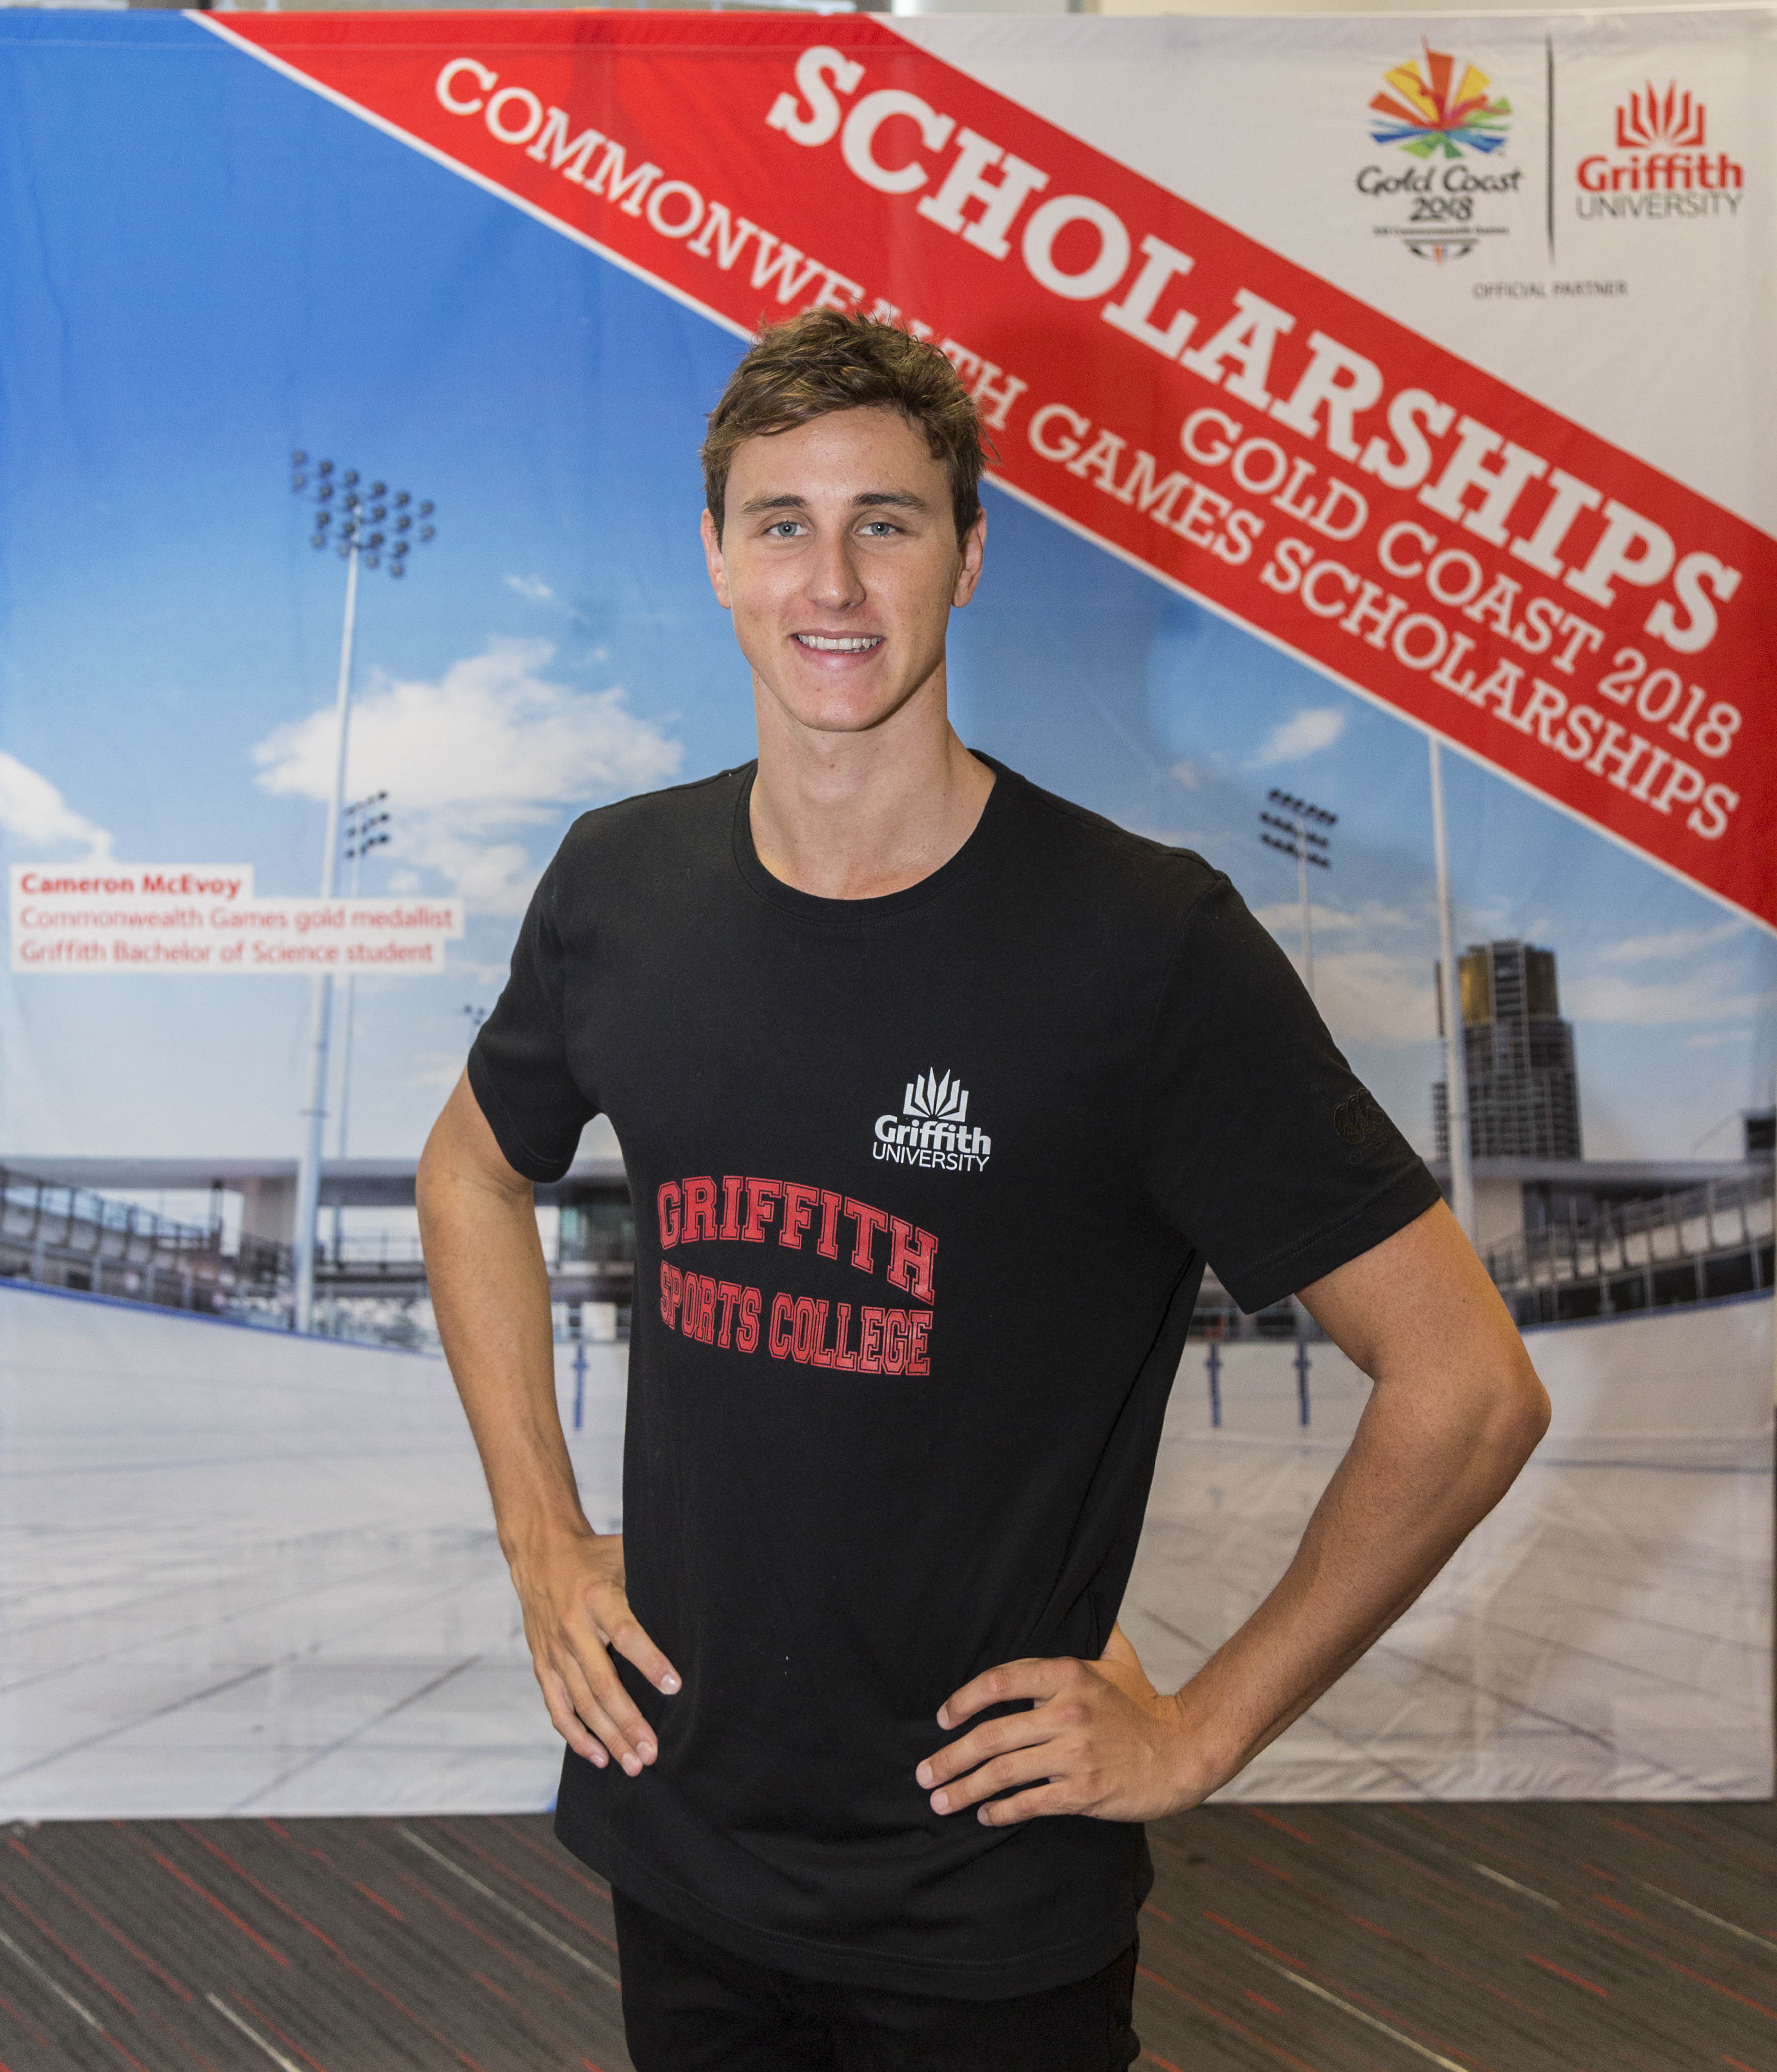 Cameron McEvoy has been named as the Griffith Games Champion